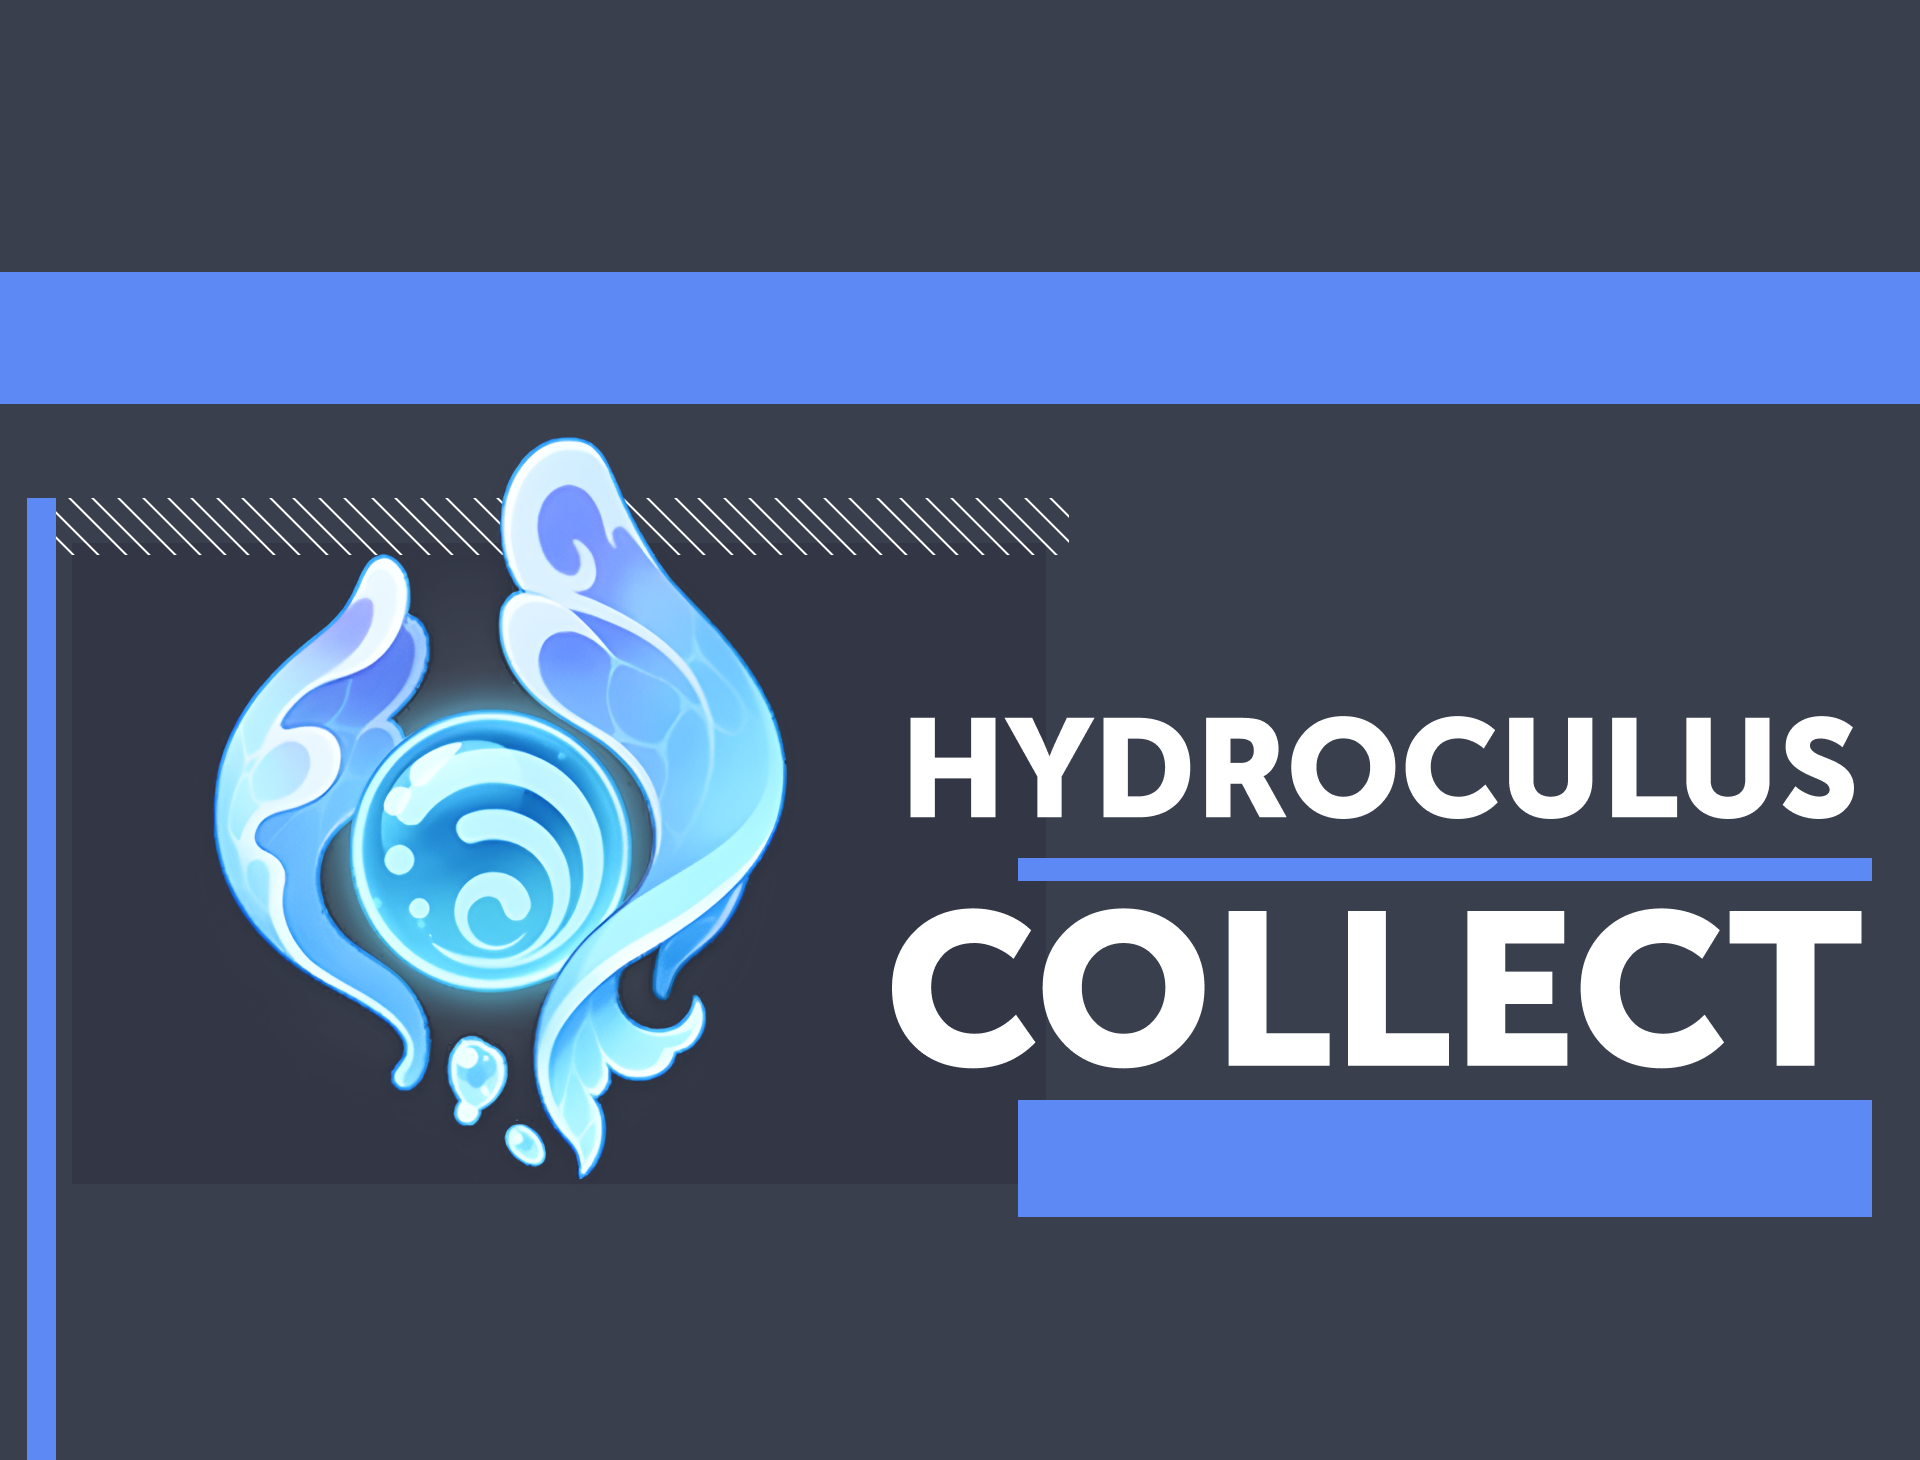 All 85 Hydroculus Collected